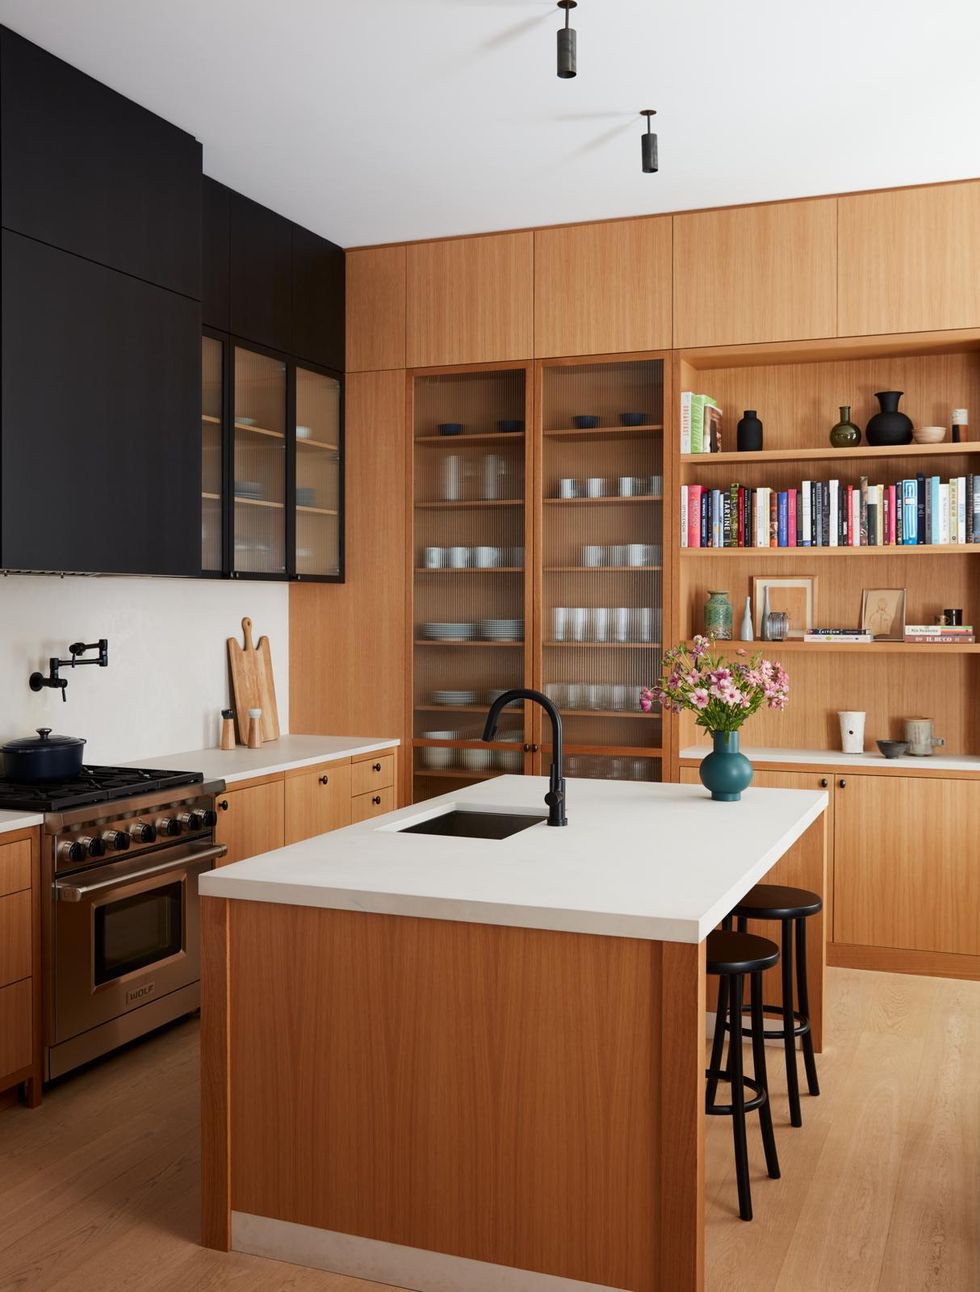 a kitchen with wood floors and shelves and black cabinets with a white island countertop